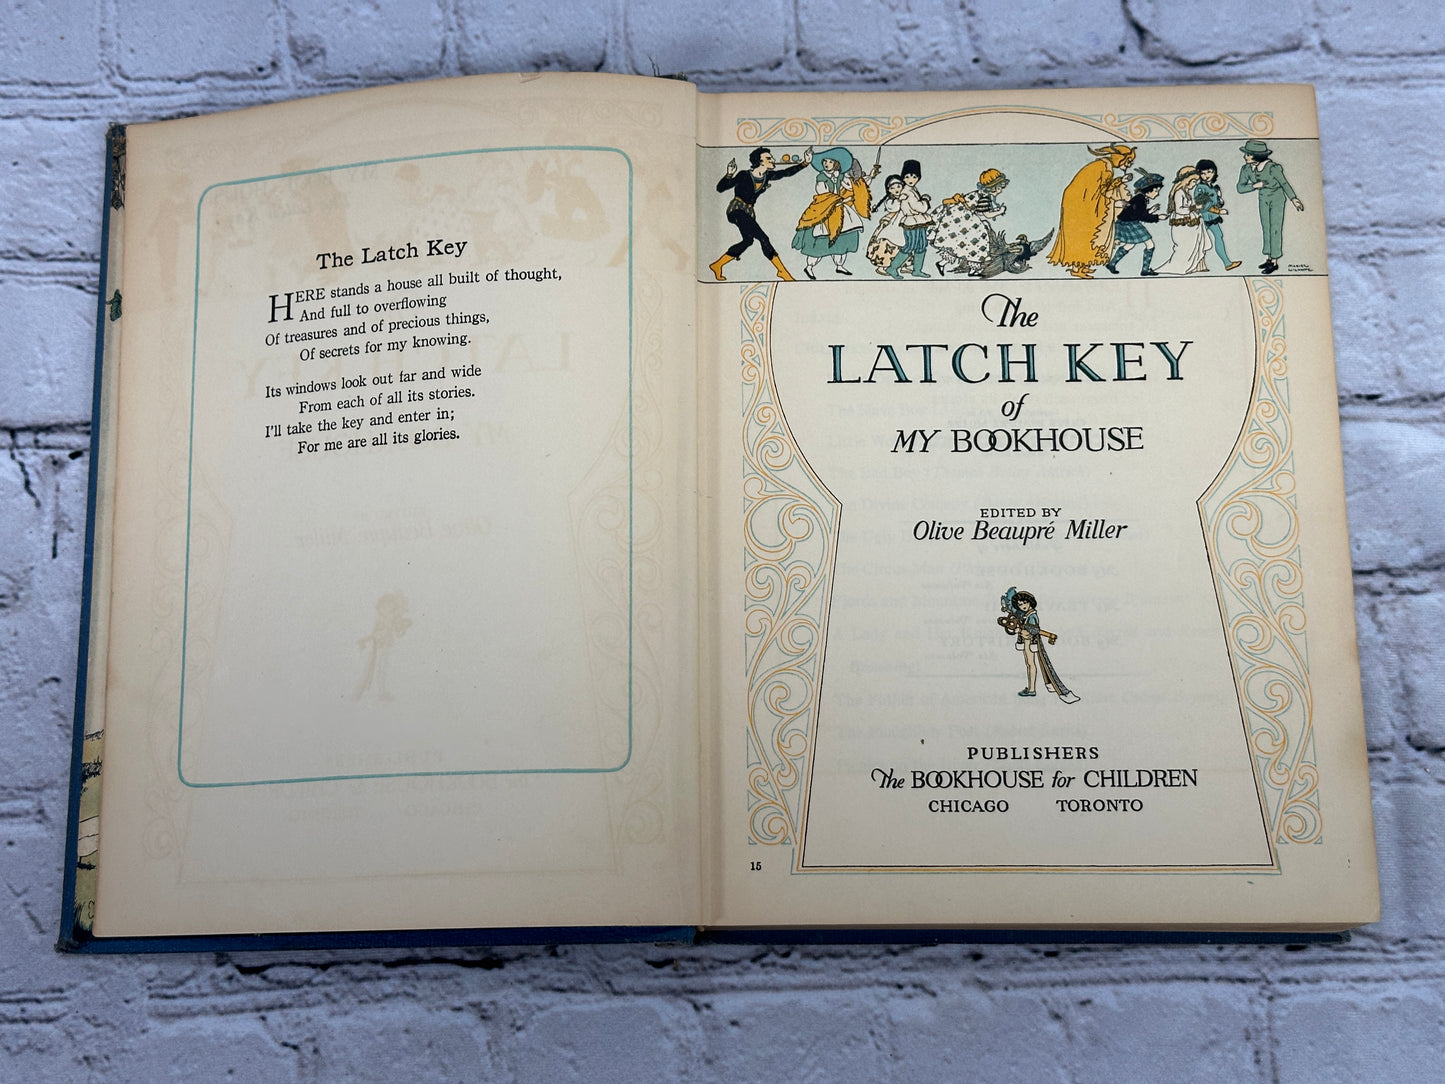 The Latch Key of My Bookhouse Edited by Olive Beaupre Miller [1925]